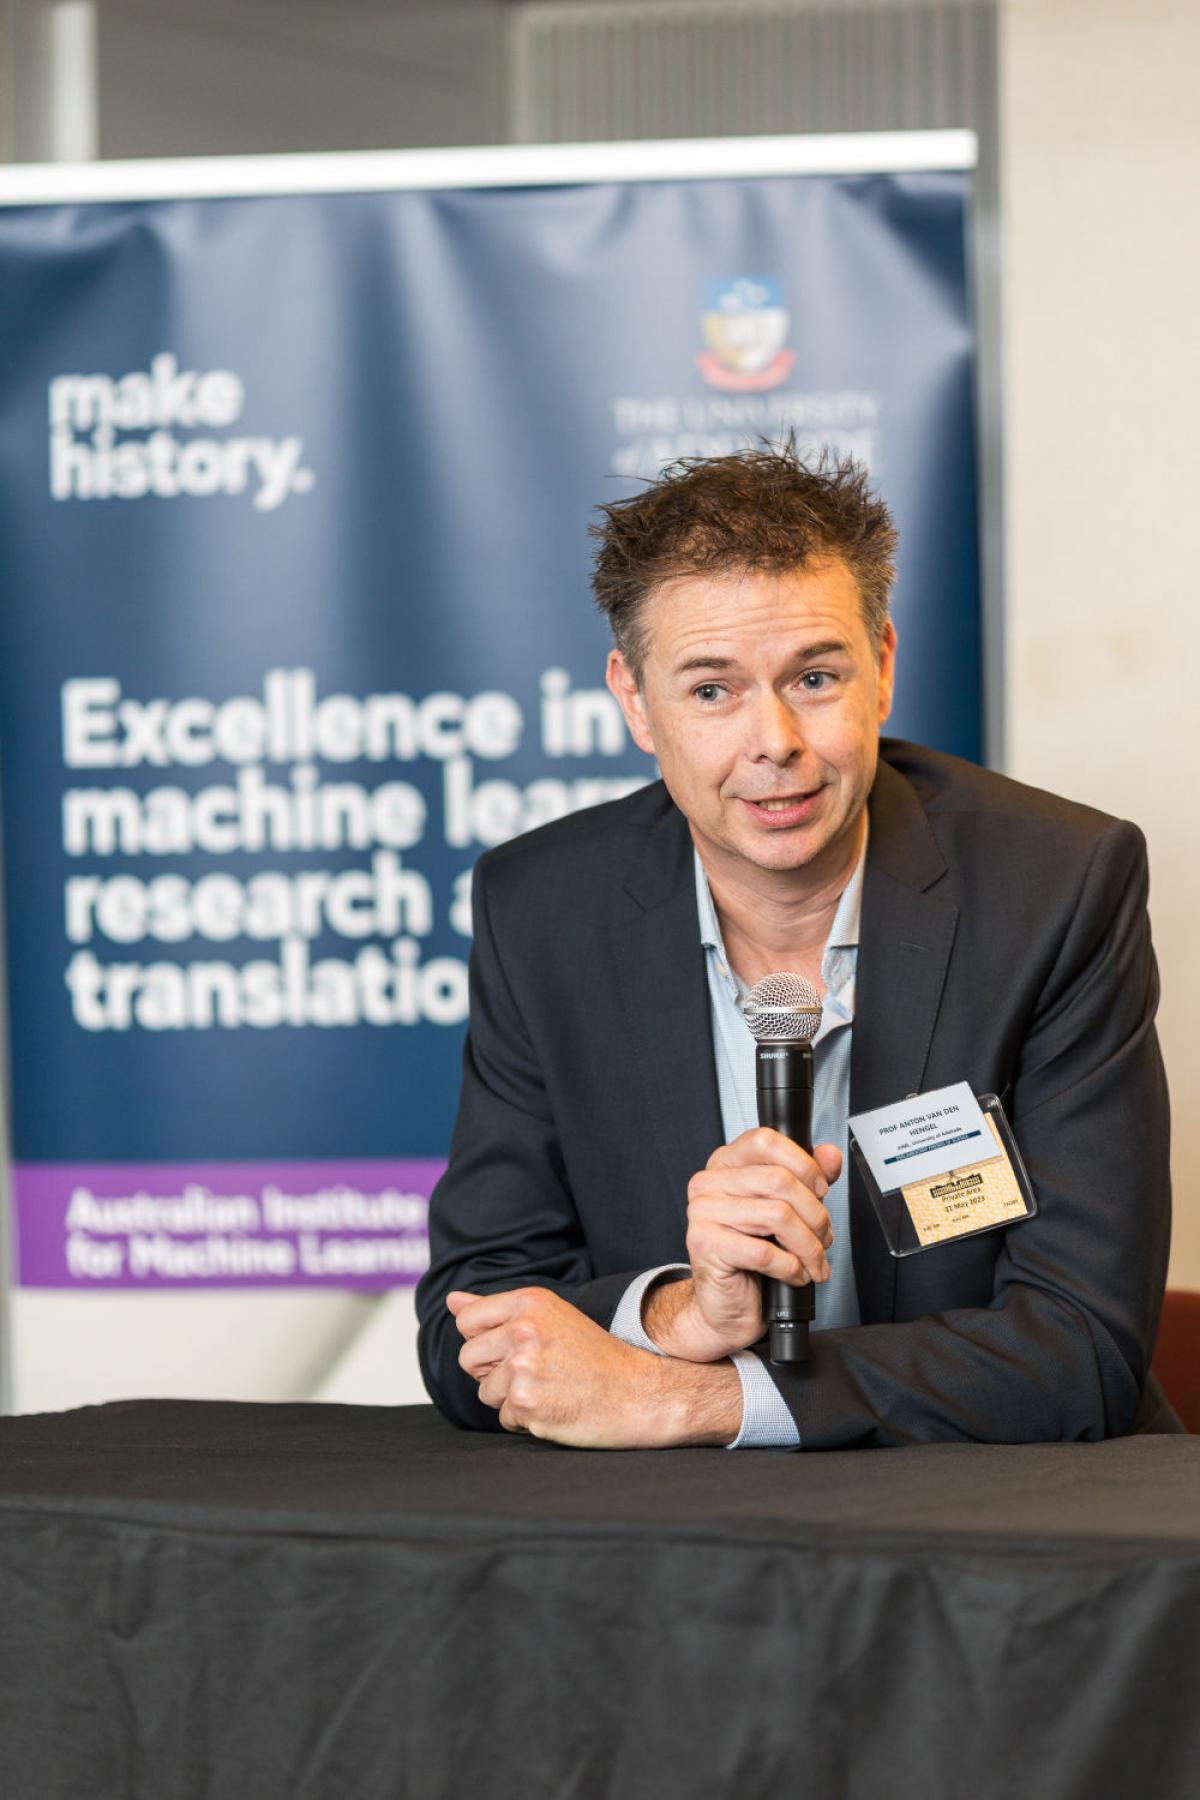 anton van den hengel speaking with microphone at parliament house event with university of adelaide poster behind